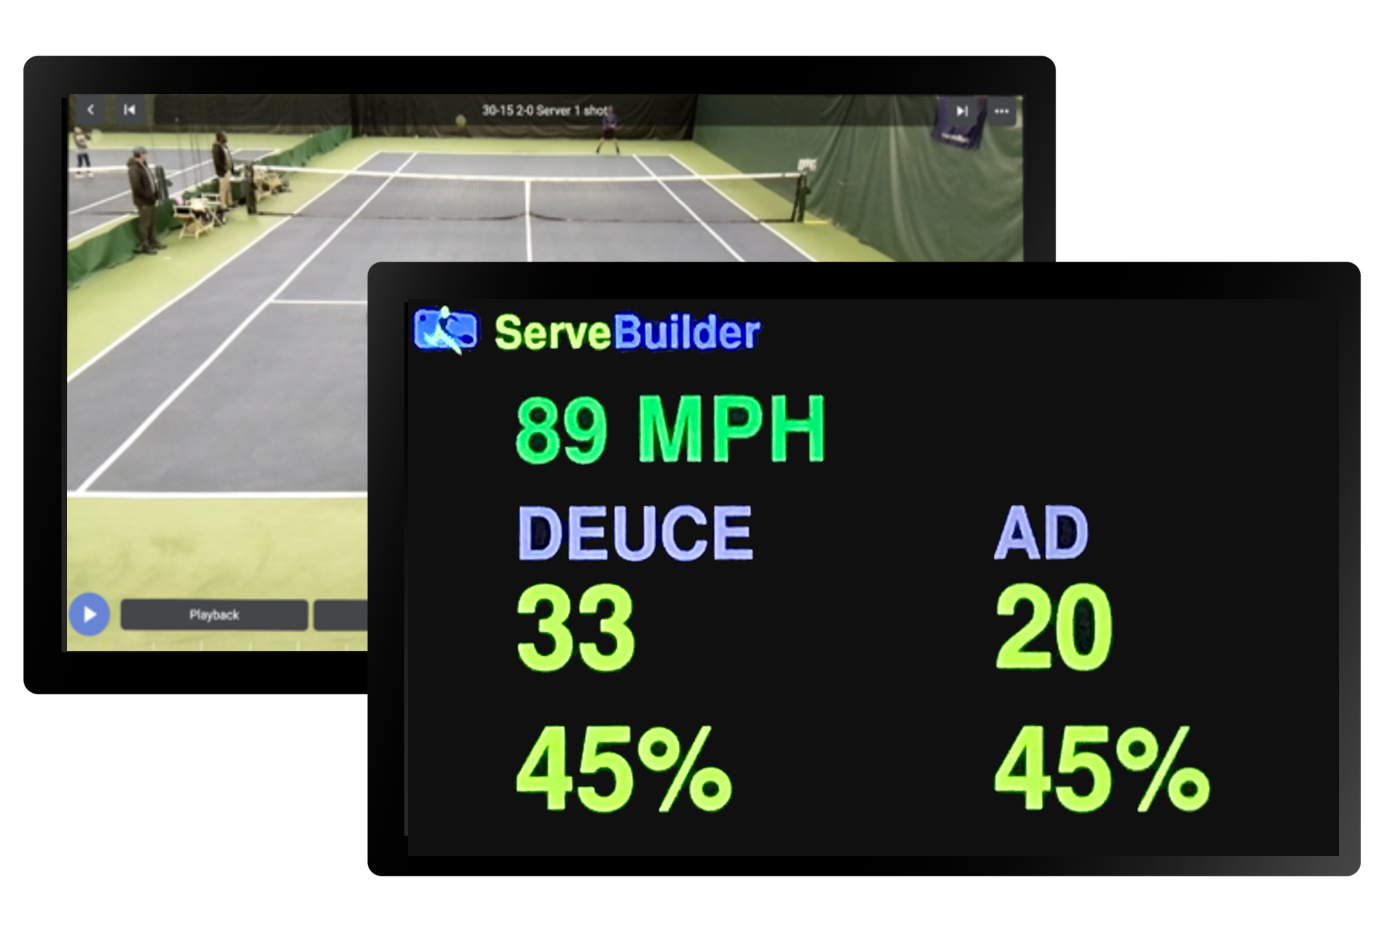 Interactive on-court scoreboards showing match video and serving drill stats